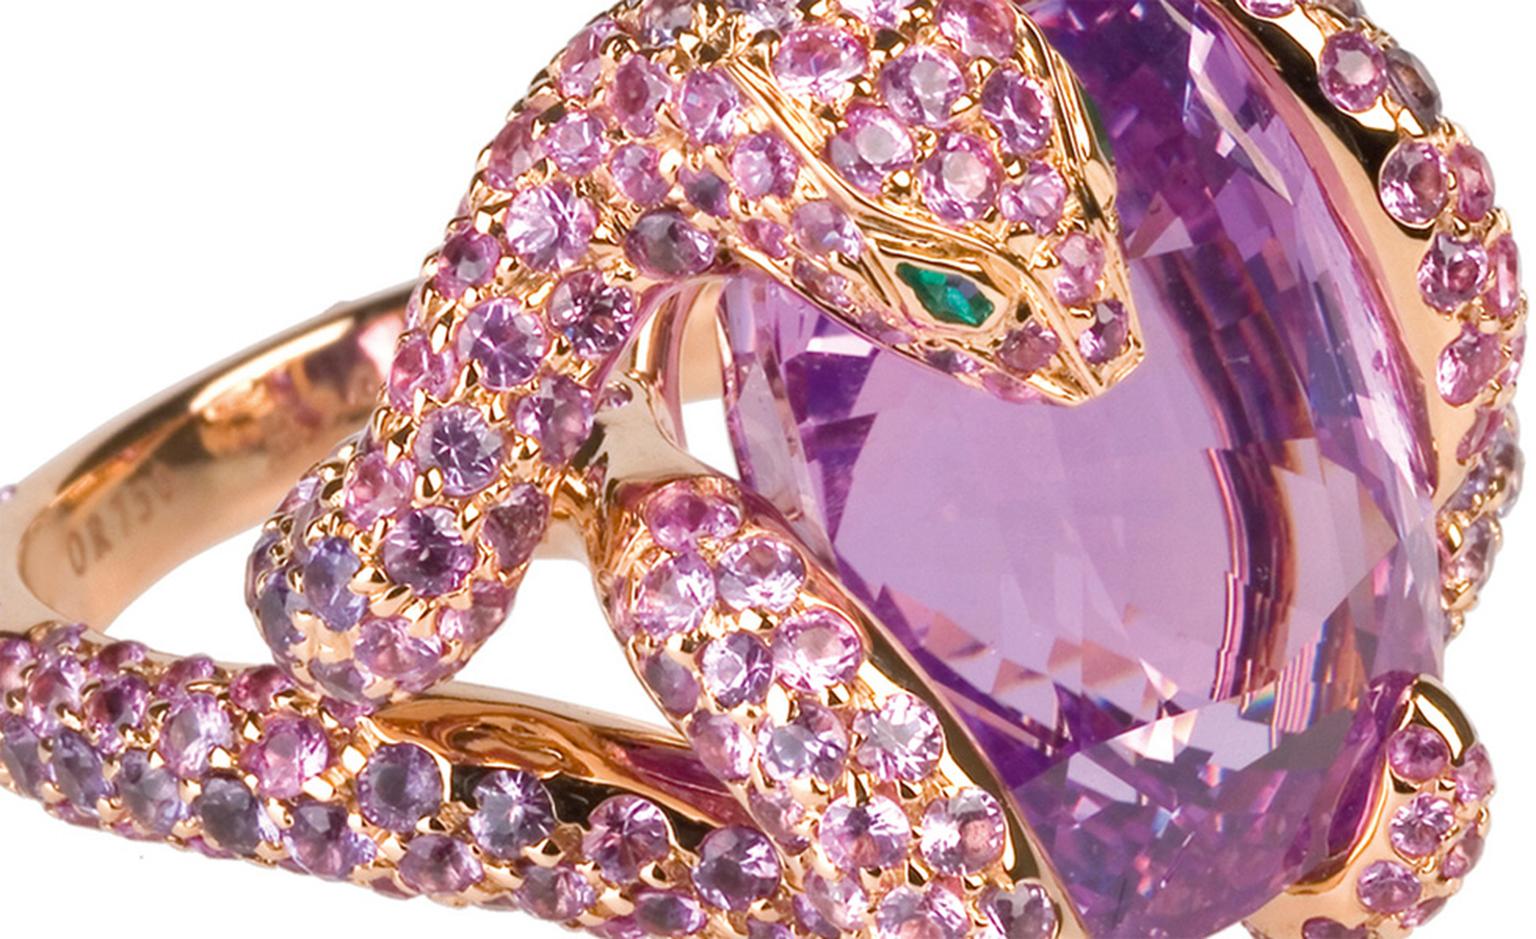 Detail of the Boucheron Python ring with a Ceylon pink 17.36 carats cushion cut sapphire and 330 pink and 51 purple sapphires set into rose gold. Price: £244,000